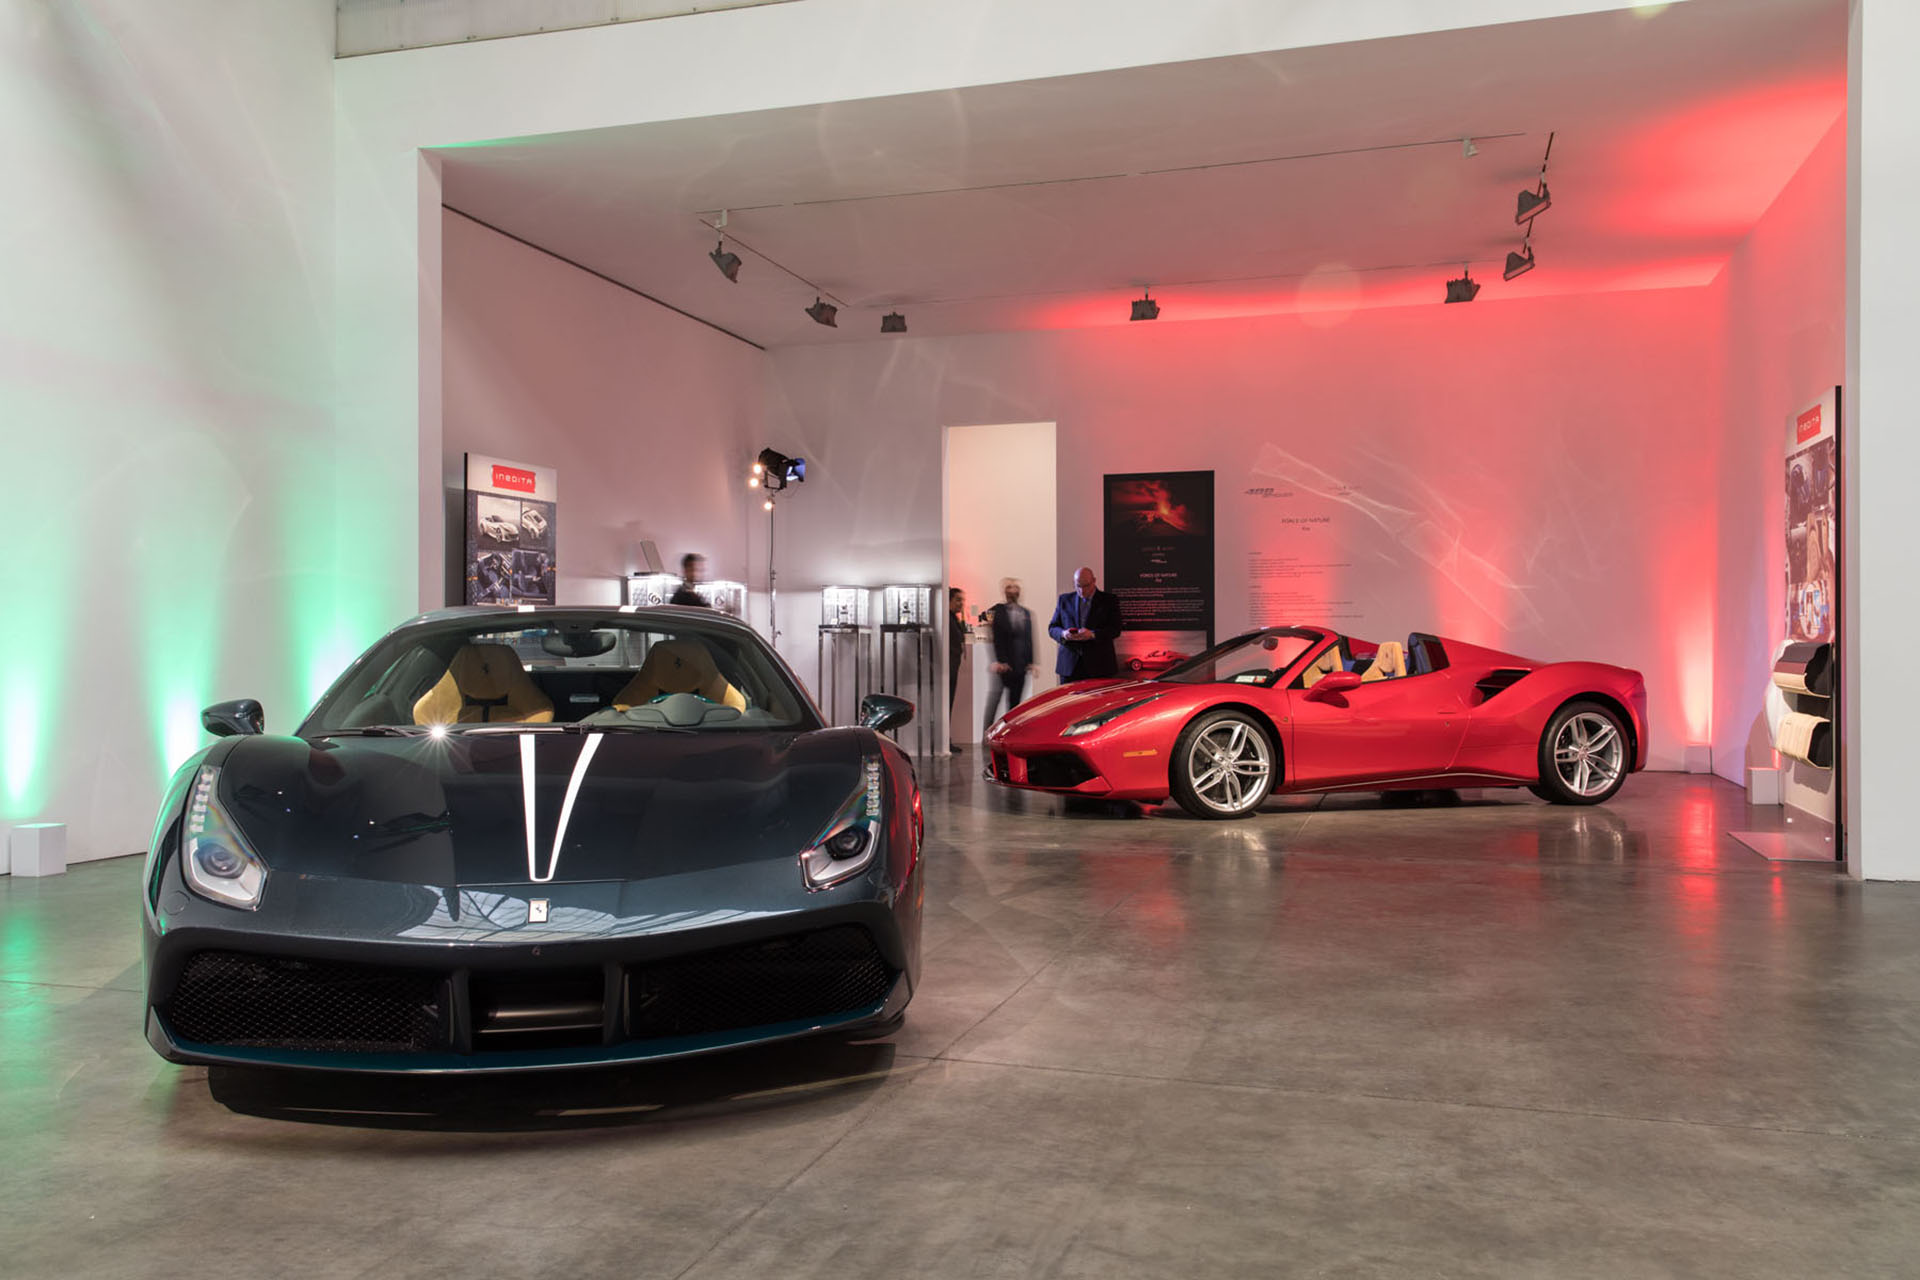 Ferrari's parked at the Tailor Made event